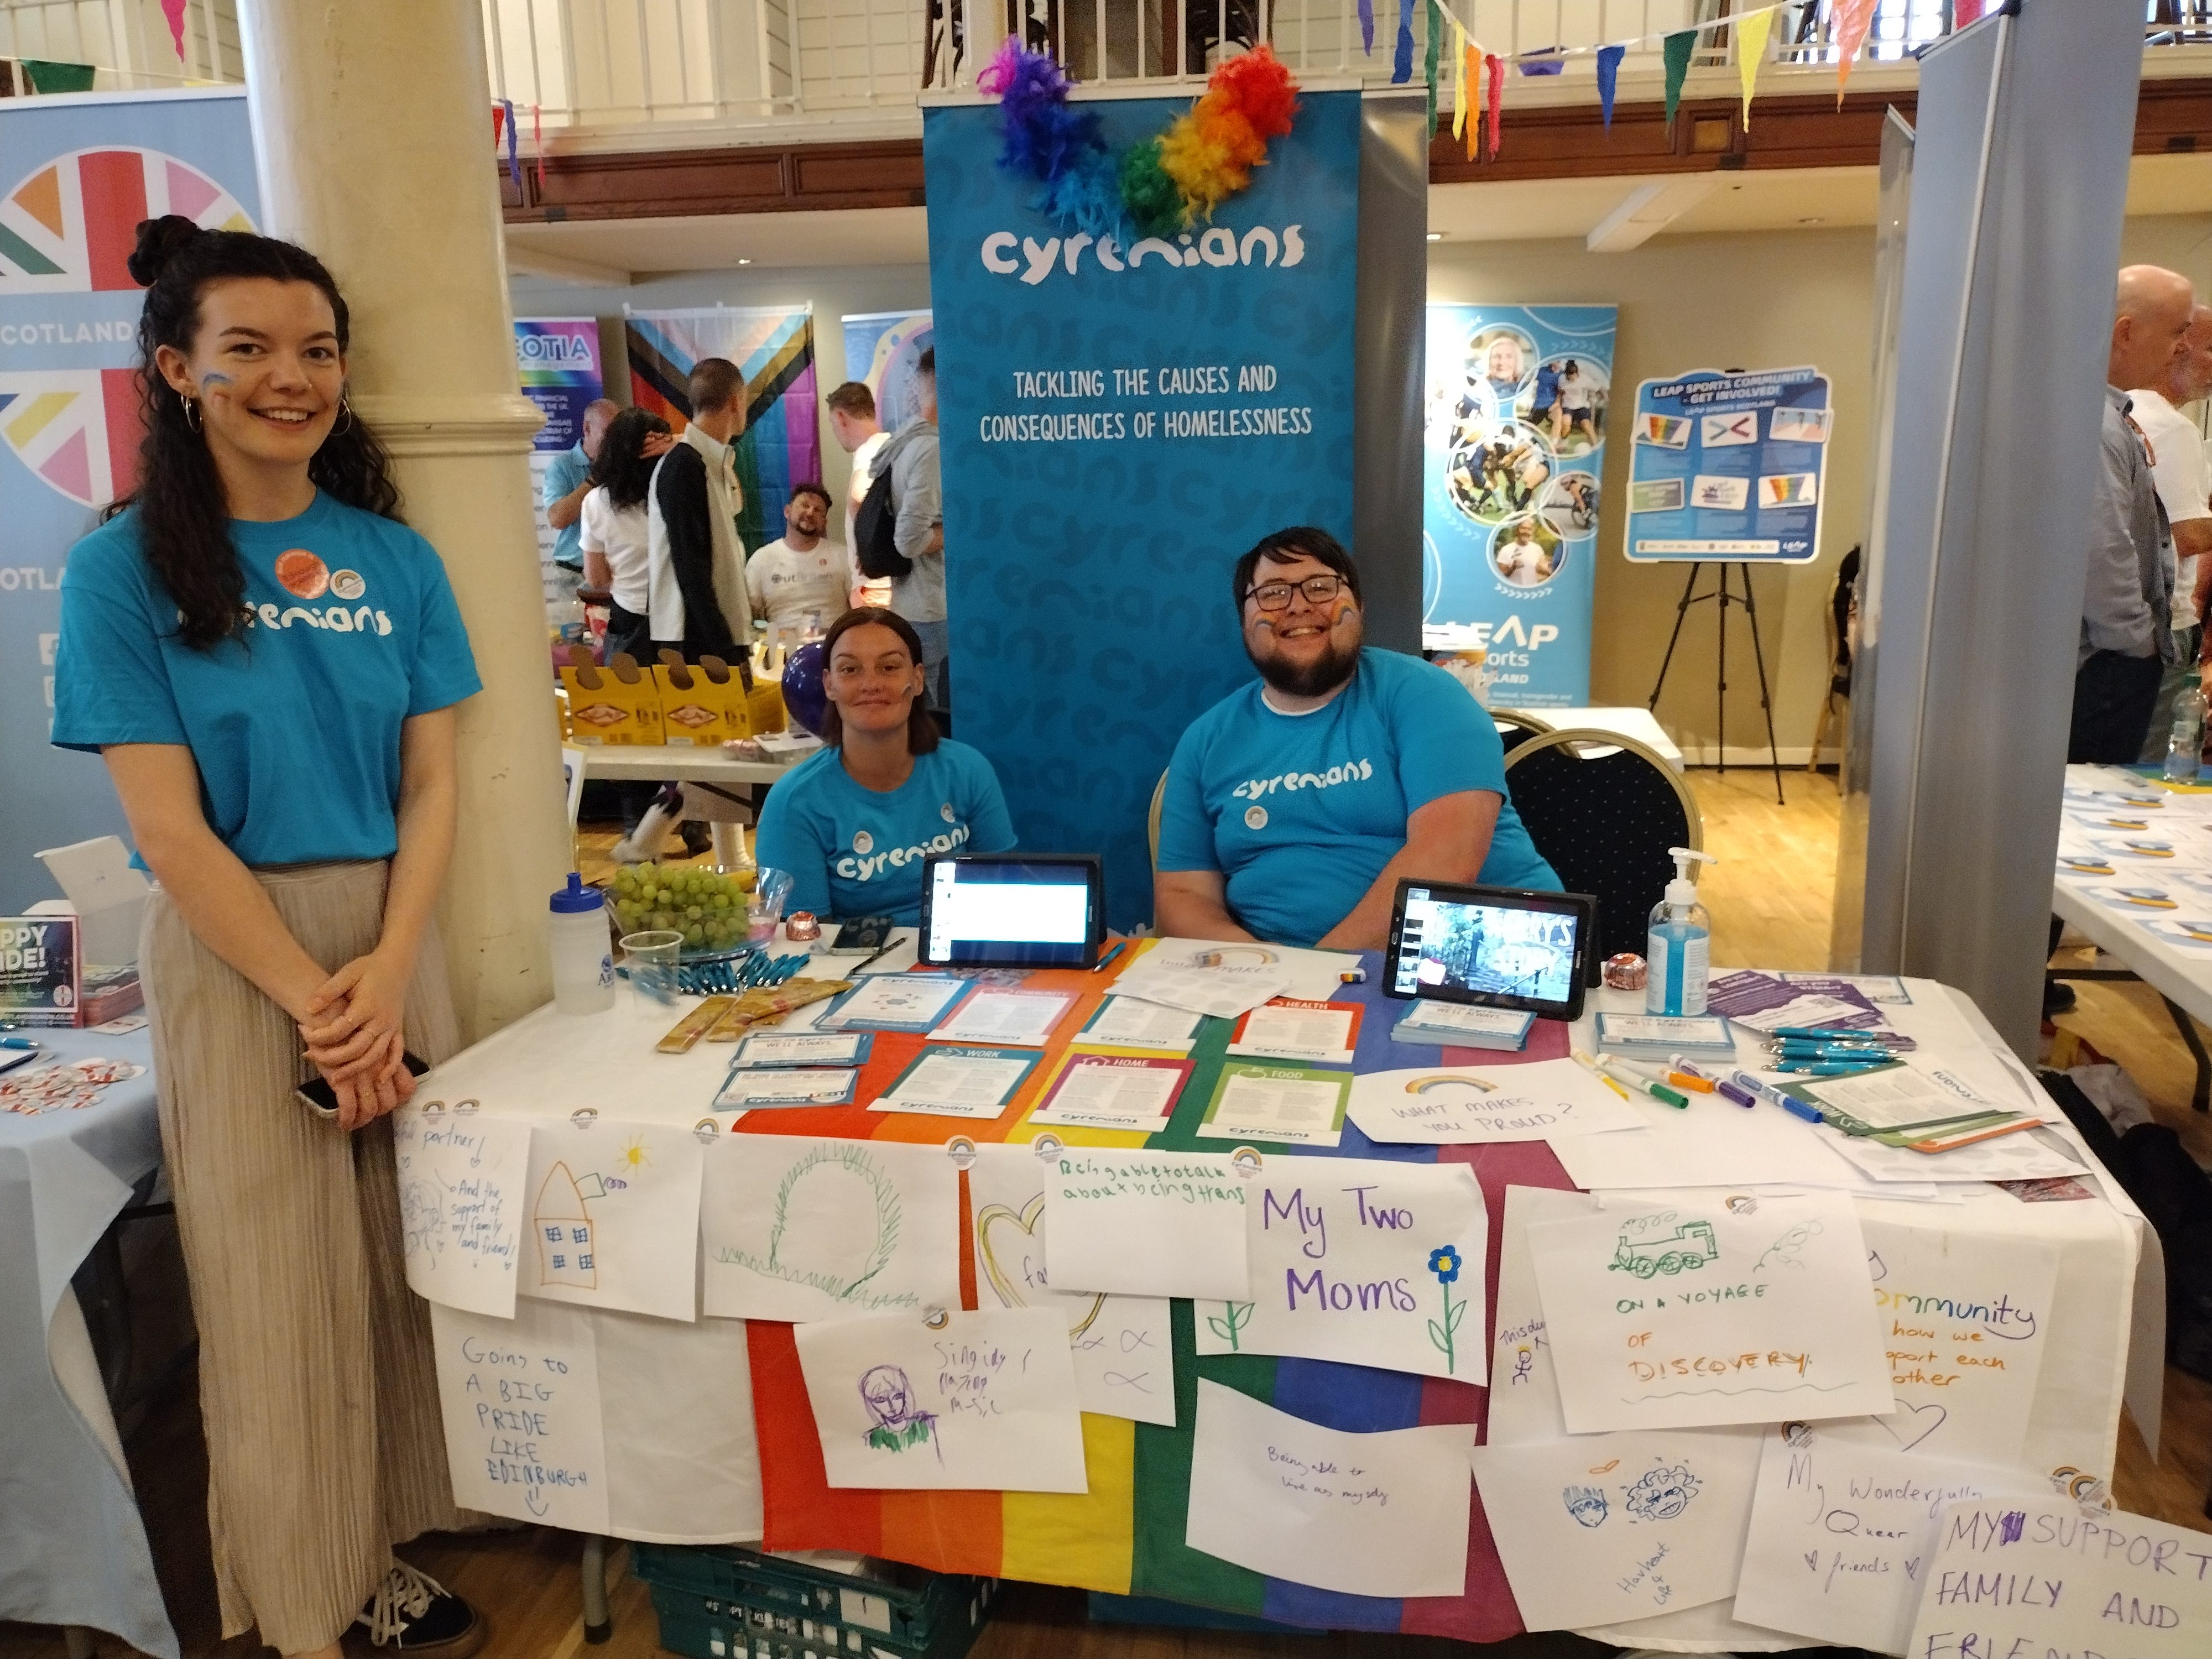 A rainbow patterned stall at Pride 2022 manned by 3 people in Cyrenians tshirts